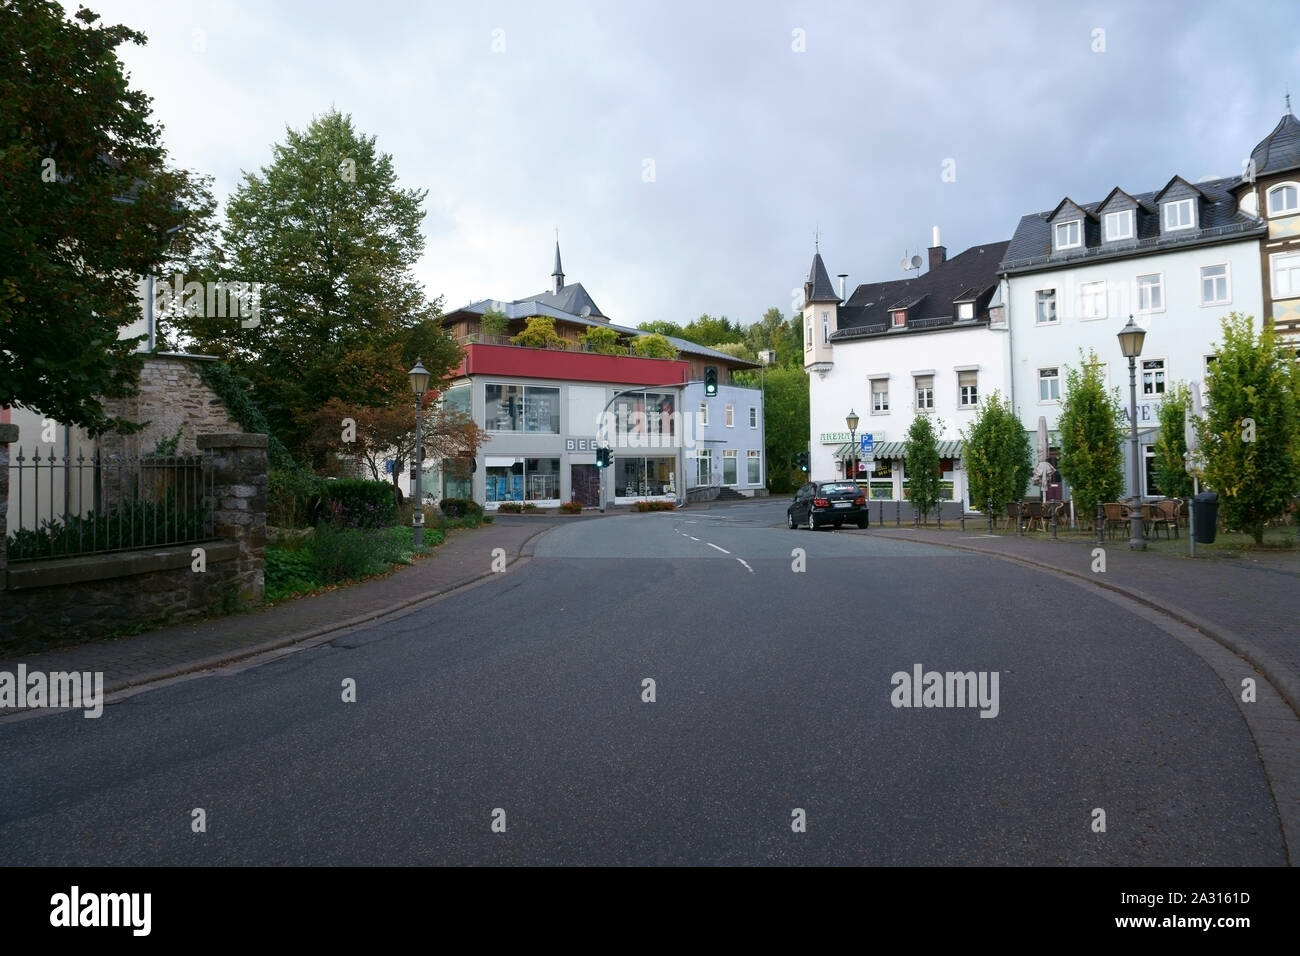 Hadamar, Germany - September 28, 2019: A street turn with restaurants and shops on September 28, 2019 in Hadamar. Stock Photo